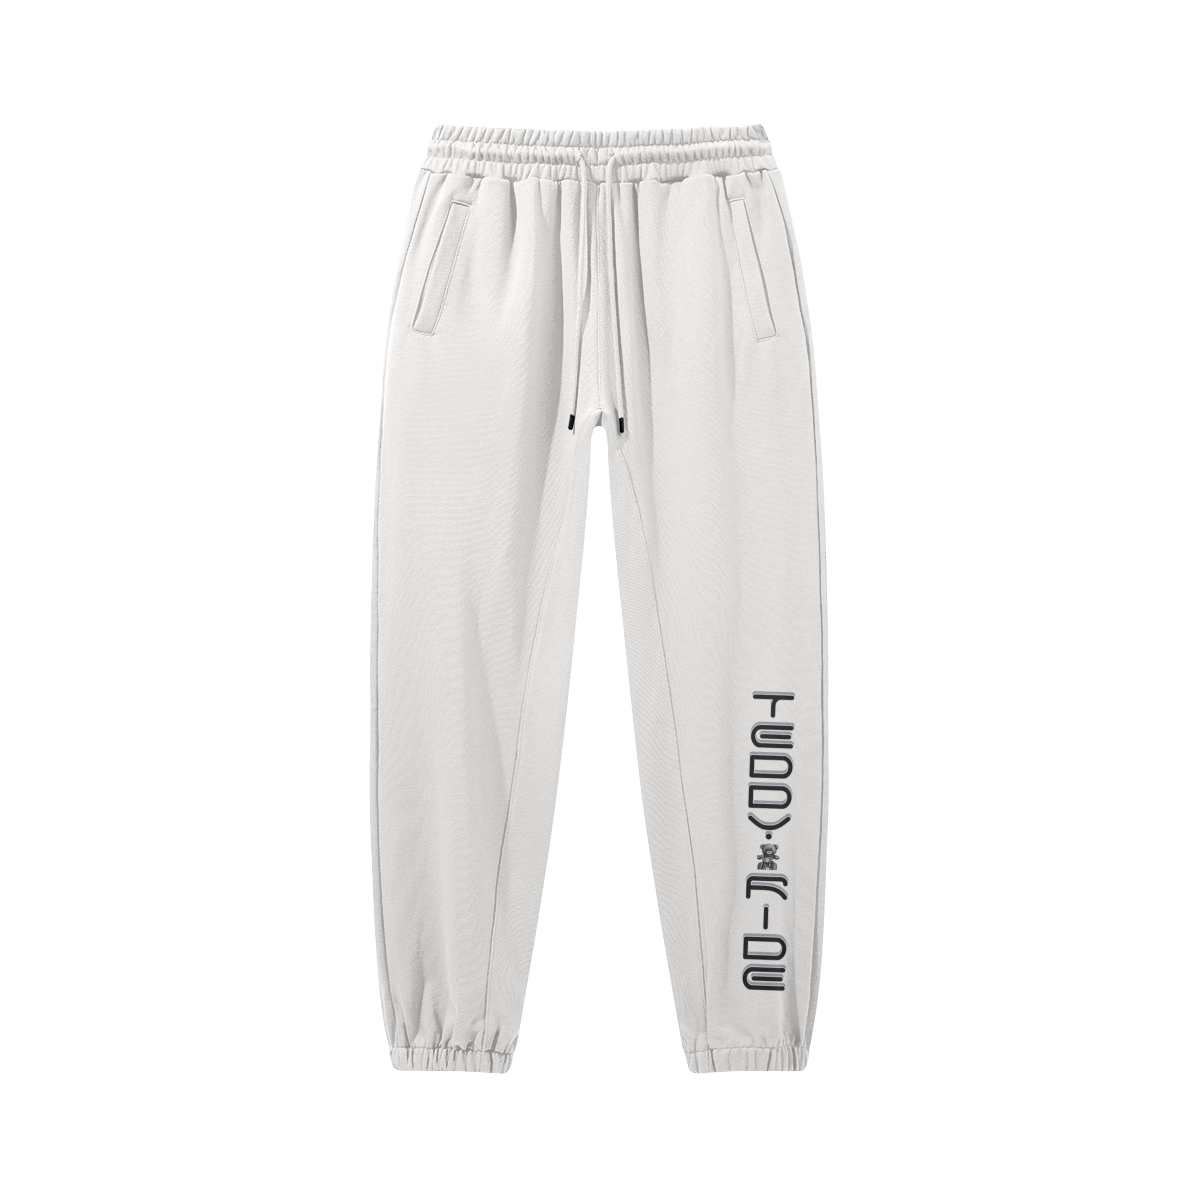 White - Teddy Ride 380GSM Unisex Heavyweight Baggy Sweatpants - unisex sweatpants at TFC&H Co.